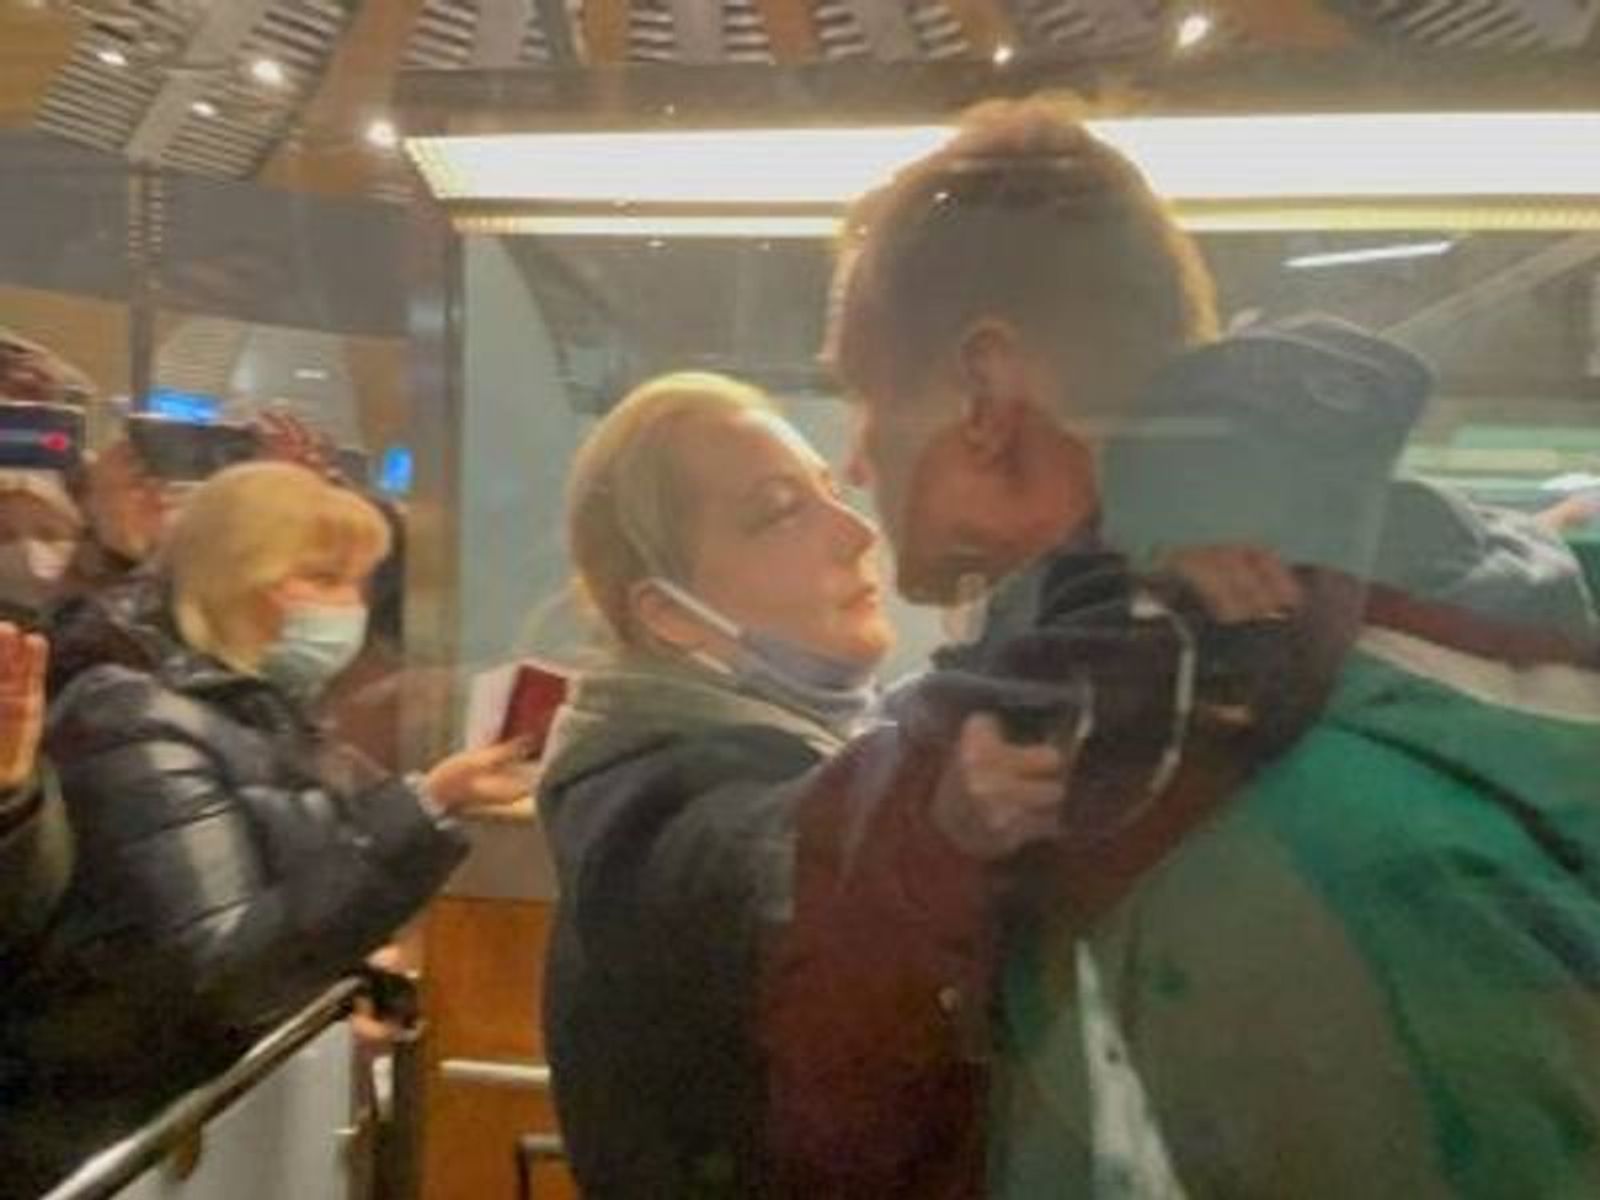 Navalny saying goodbye to his wife before crossing Russia's national border at the airport